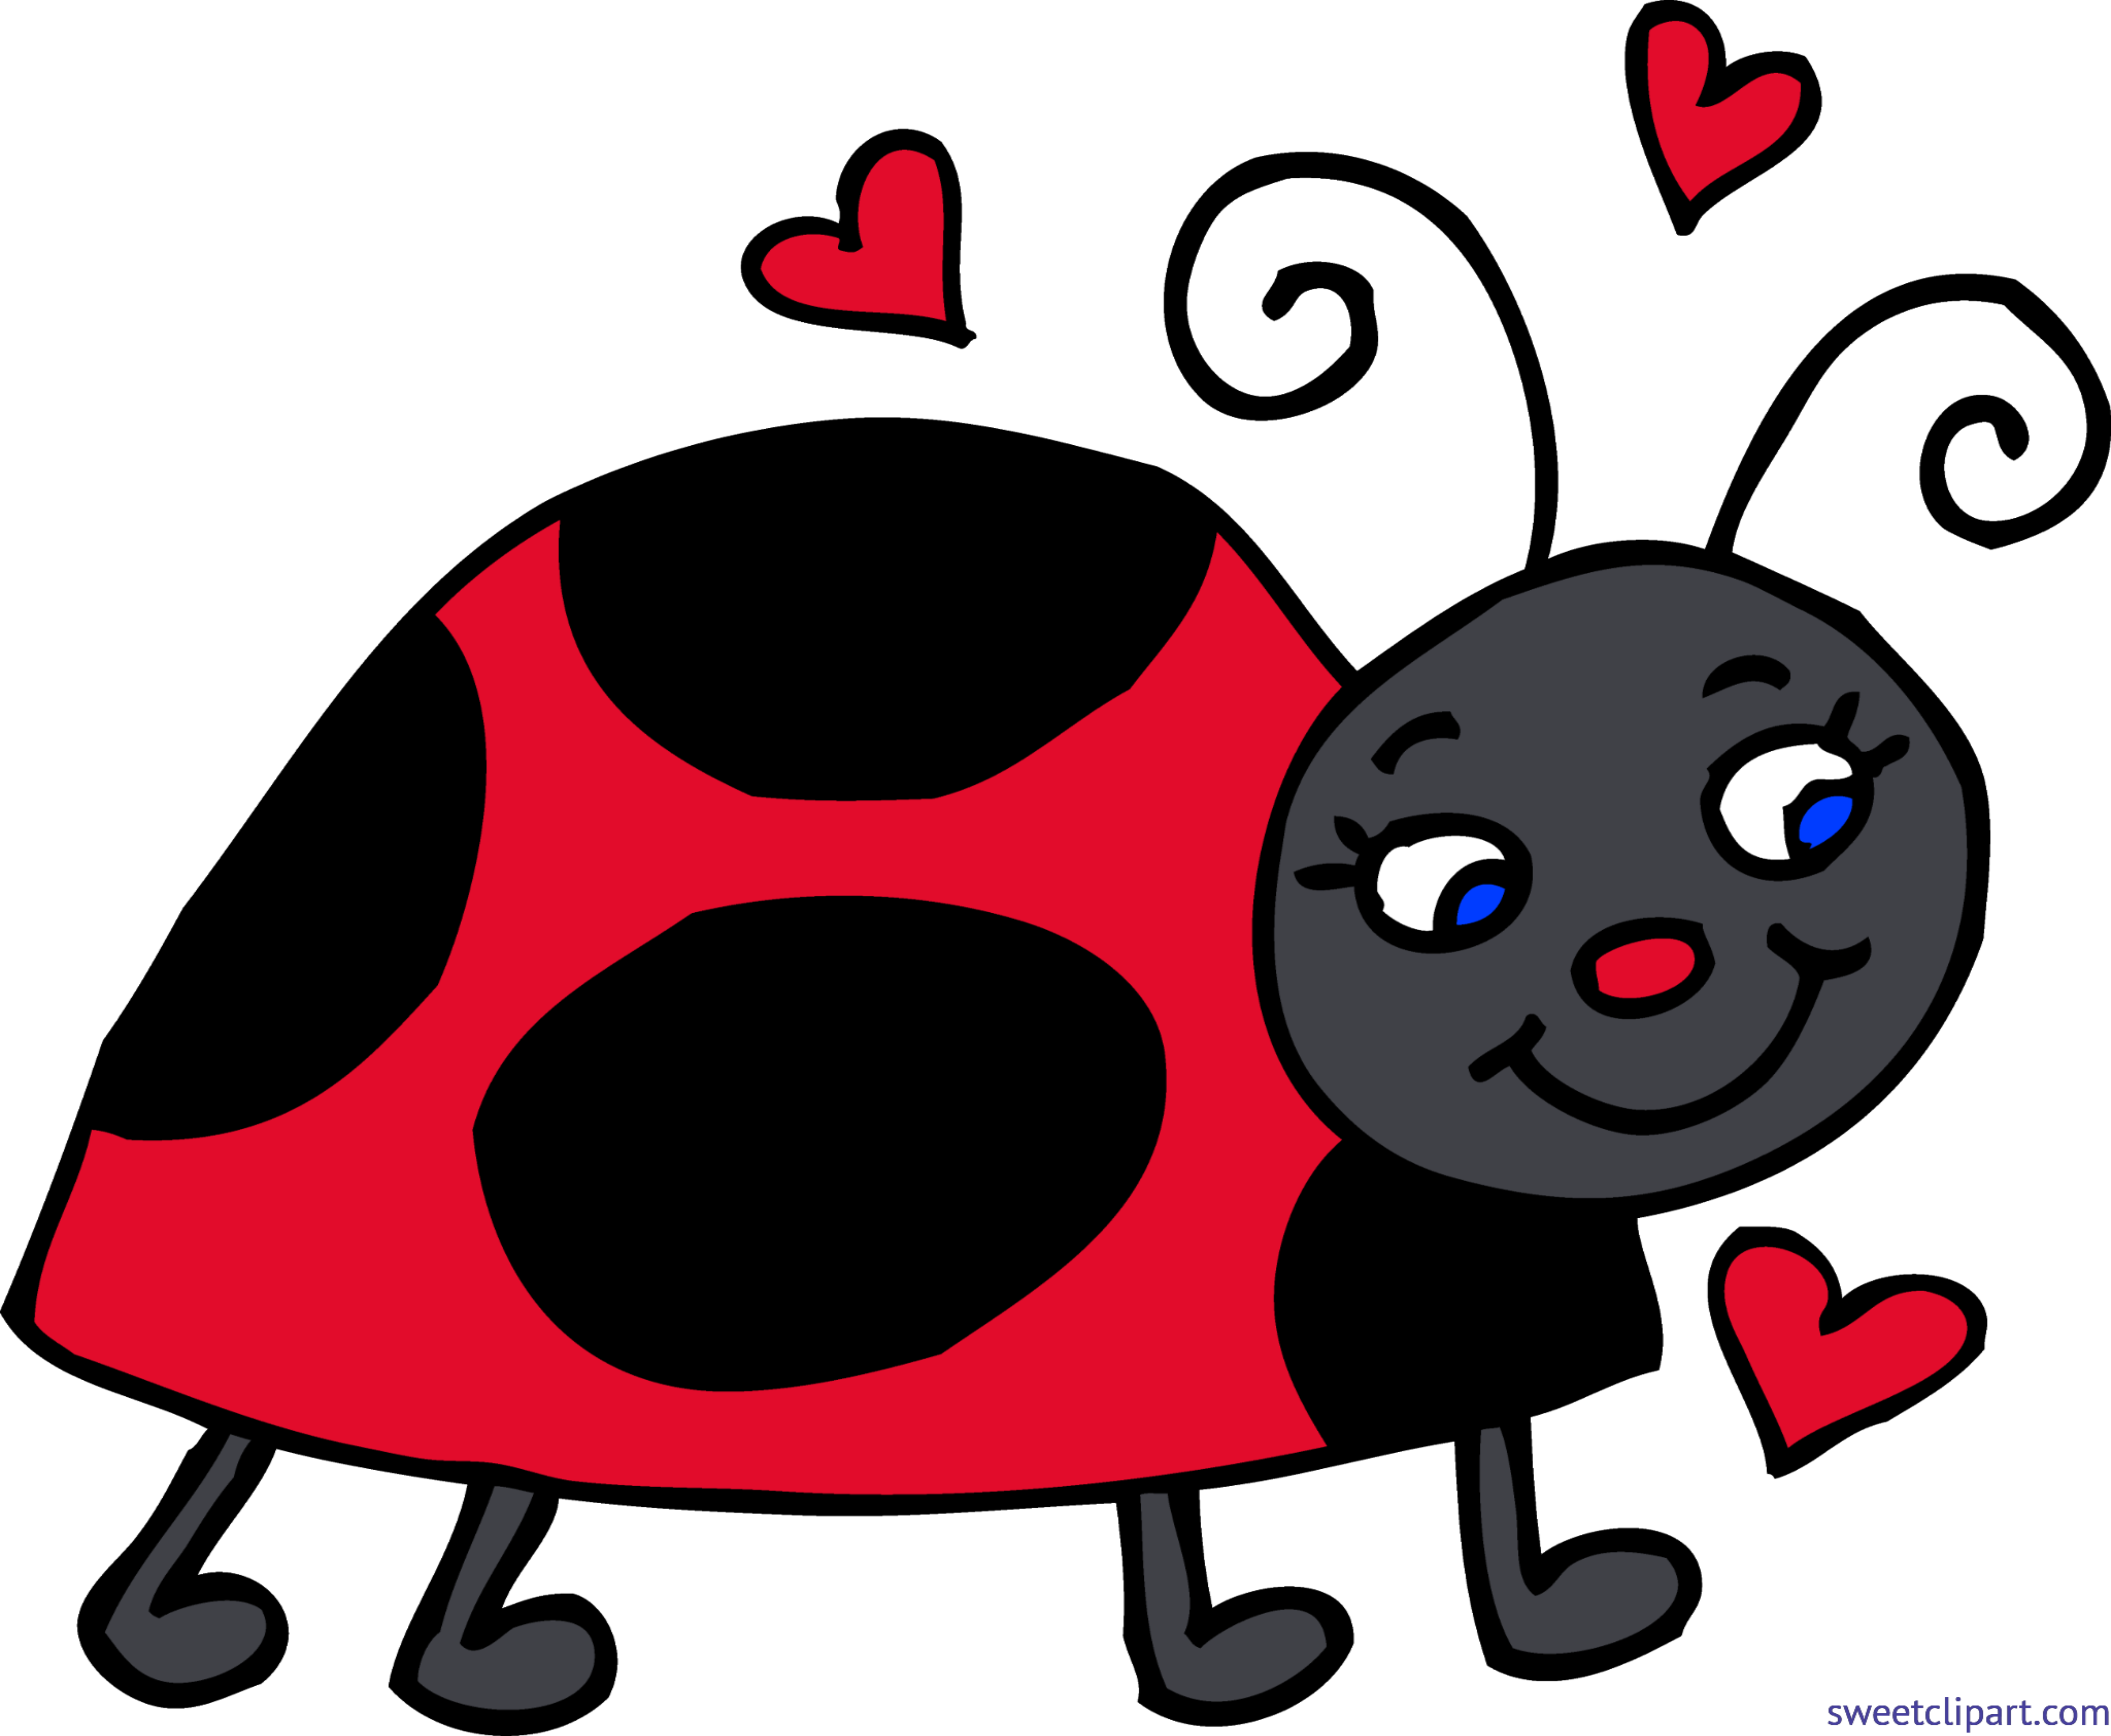 Ladybug clipart animated. Cute at getdrawings com